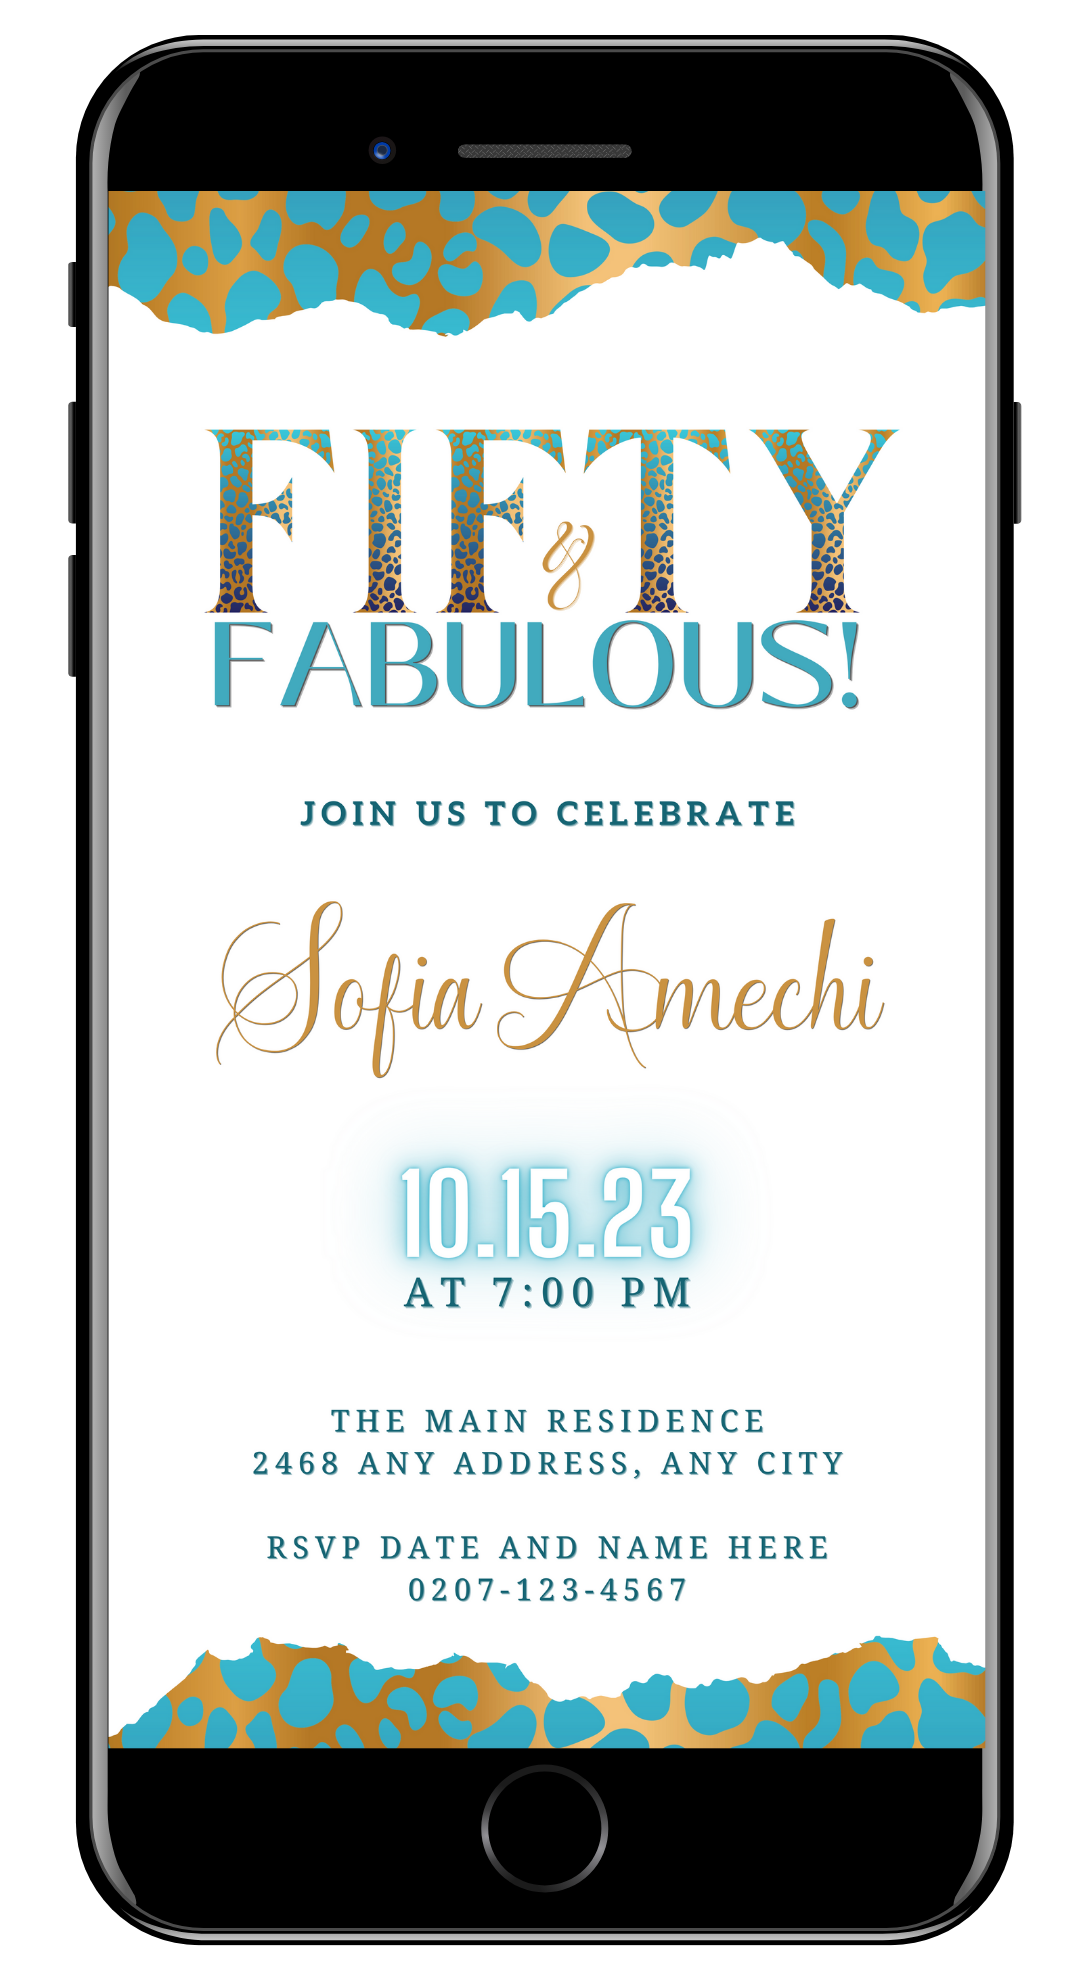 Customizable Digital Teal White Gold Cheetah | 50 & Fabulous Party Evite displayed on a smartphone screen with editable text and design elements for personalization.